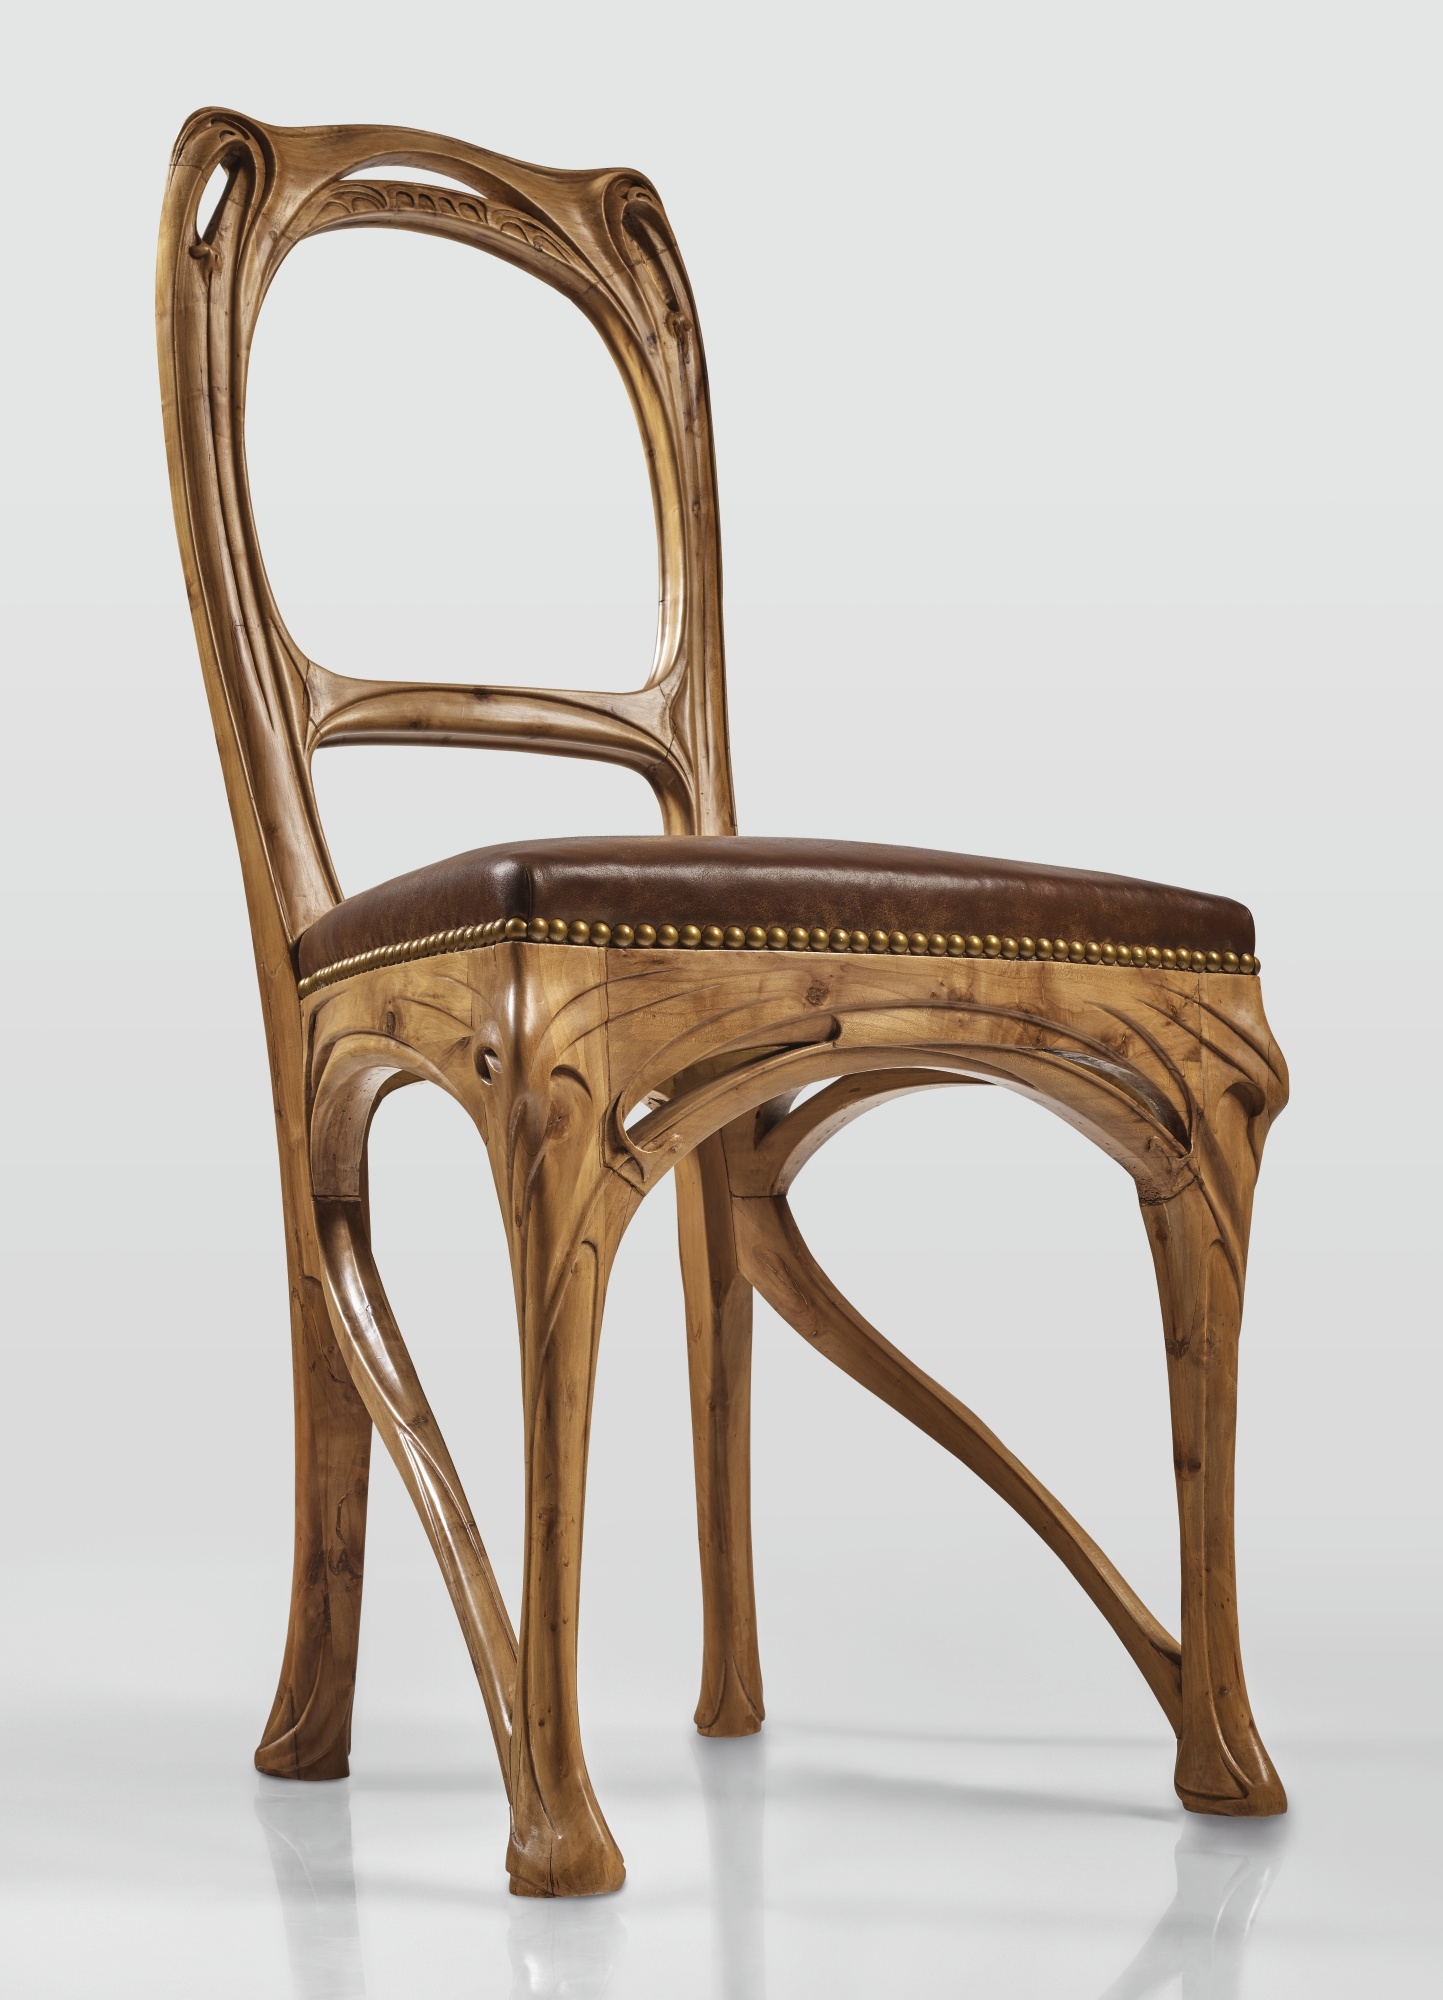 SIDE CHAIR by Hector Guimard, circa 1898